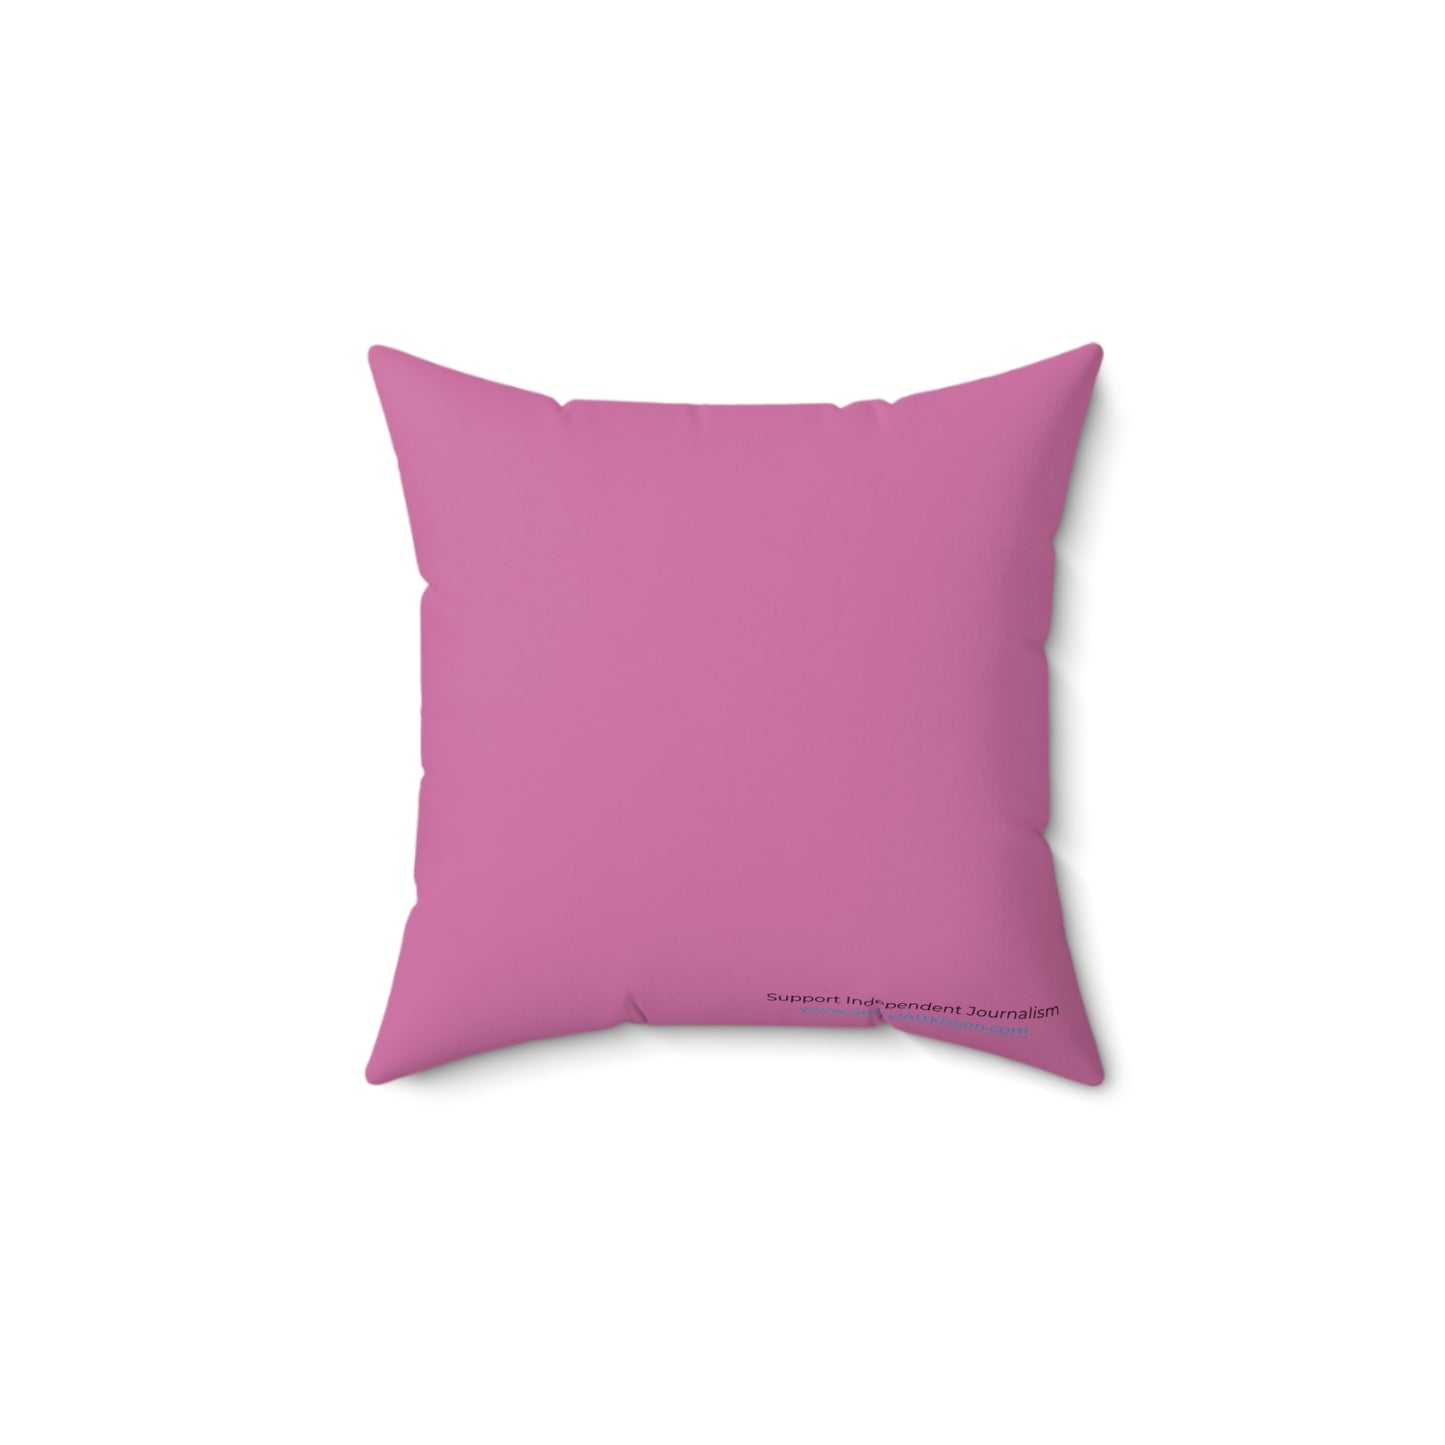 'I'm a Thinker' Faux Suede Pillow (3 sizes)